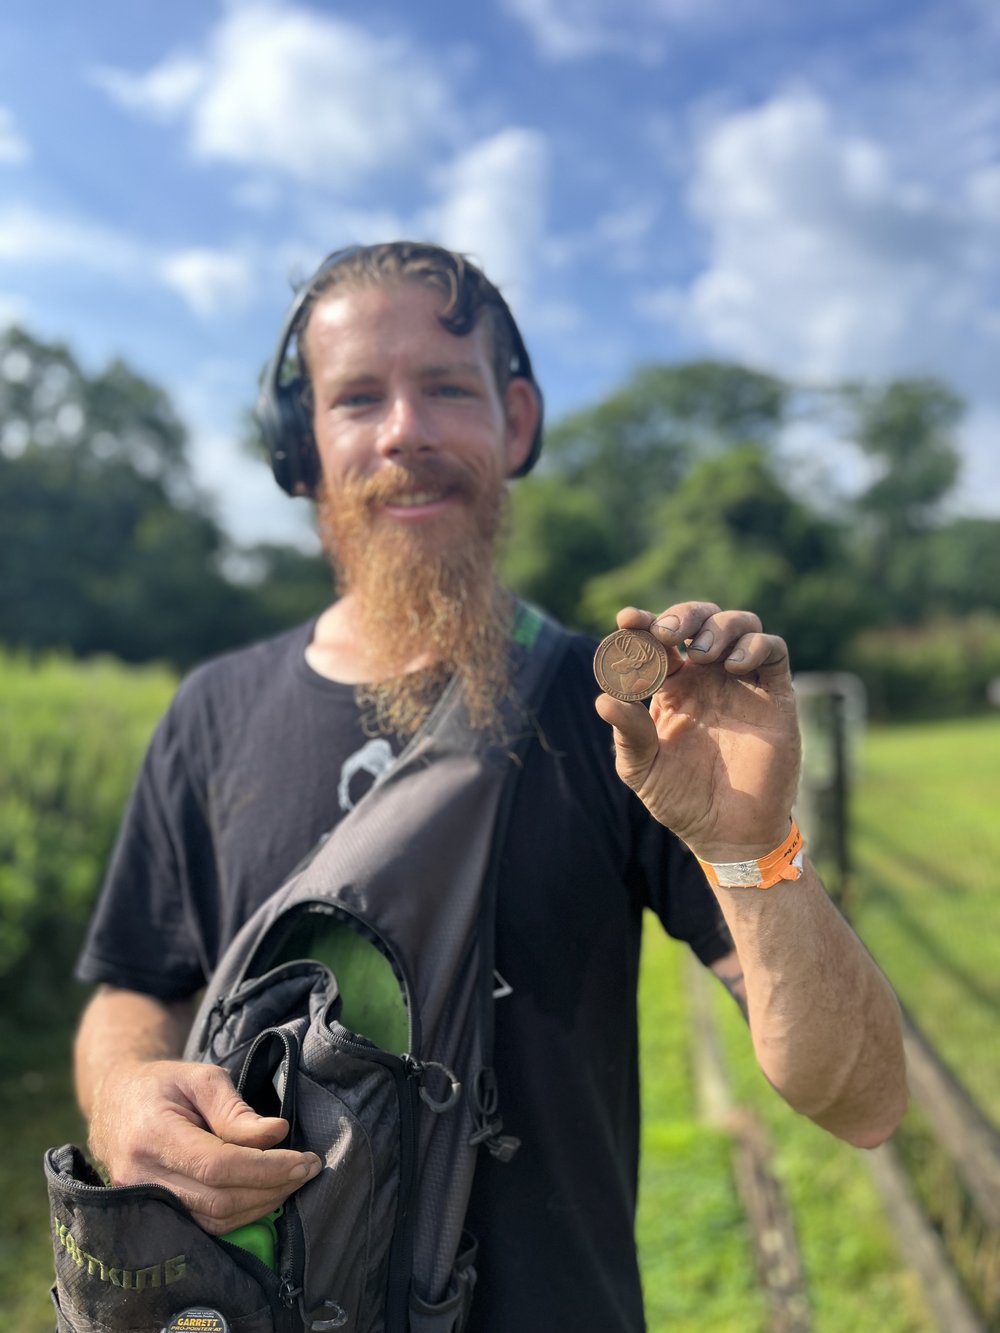 Rich Oppenheimer from Langhorne, PA with an estimated 1970s commemorative National Rifle Association token. He has been metal detecting for 2.5 years. 